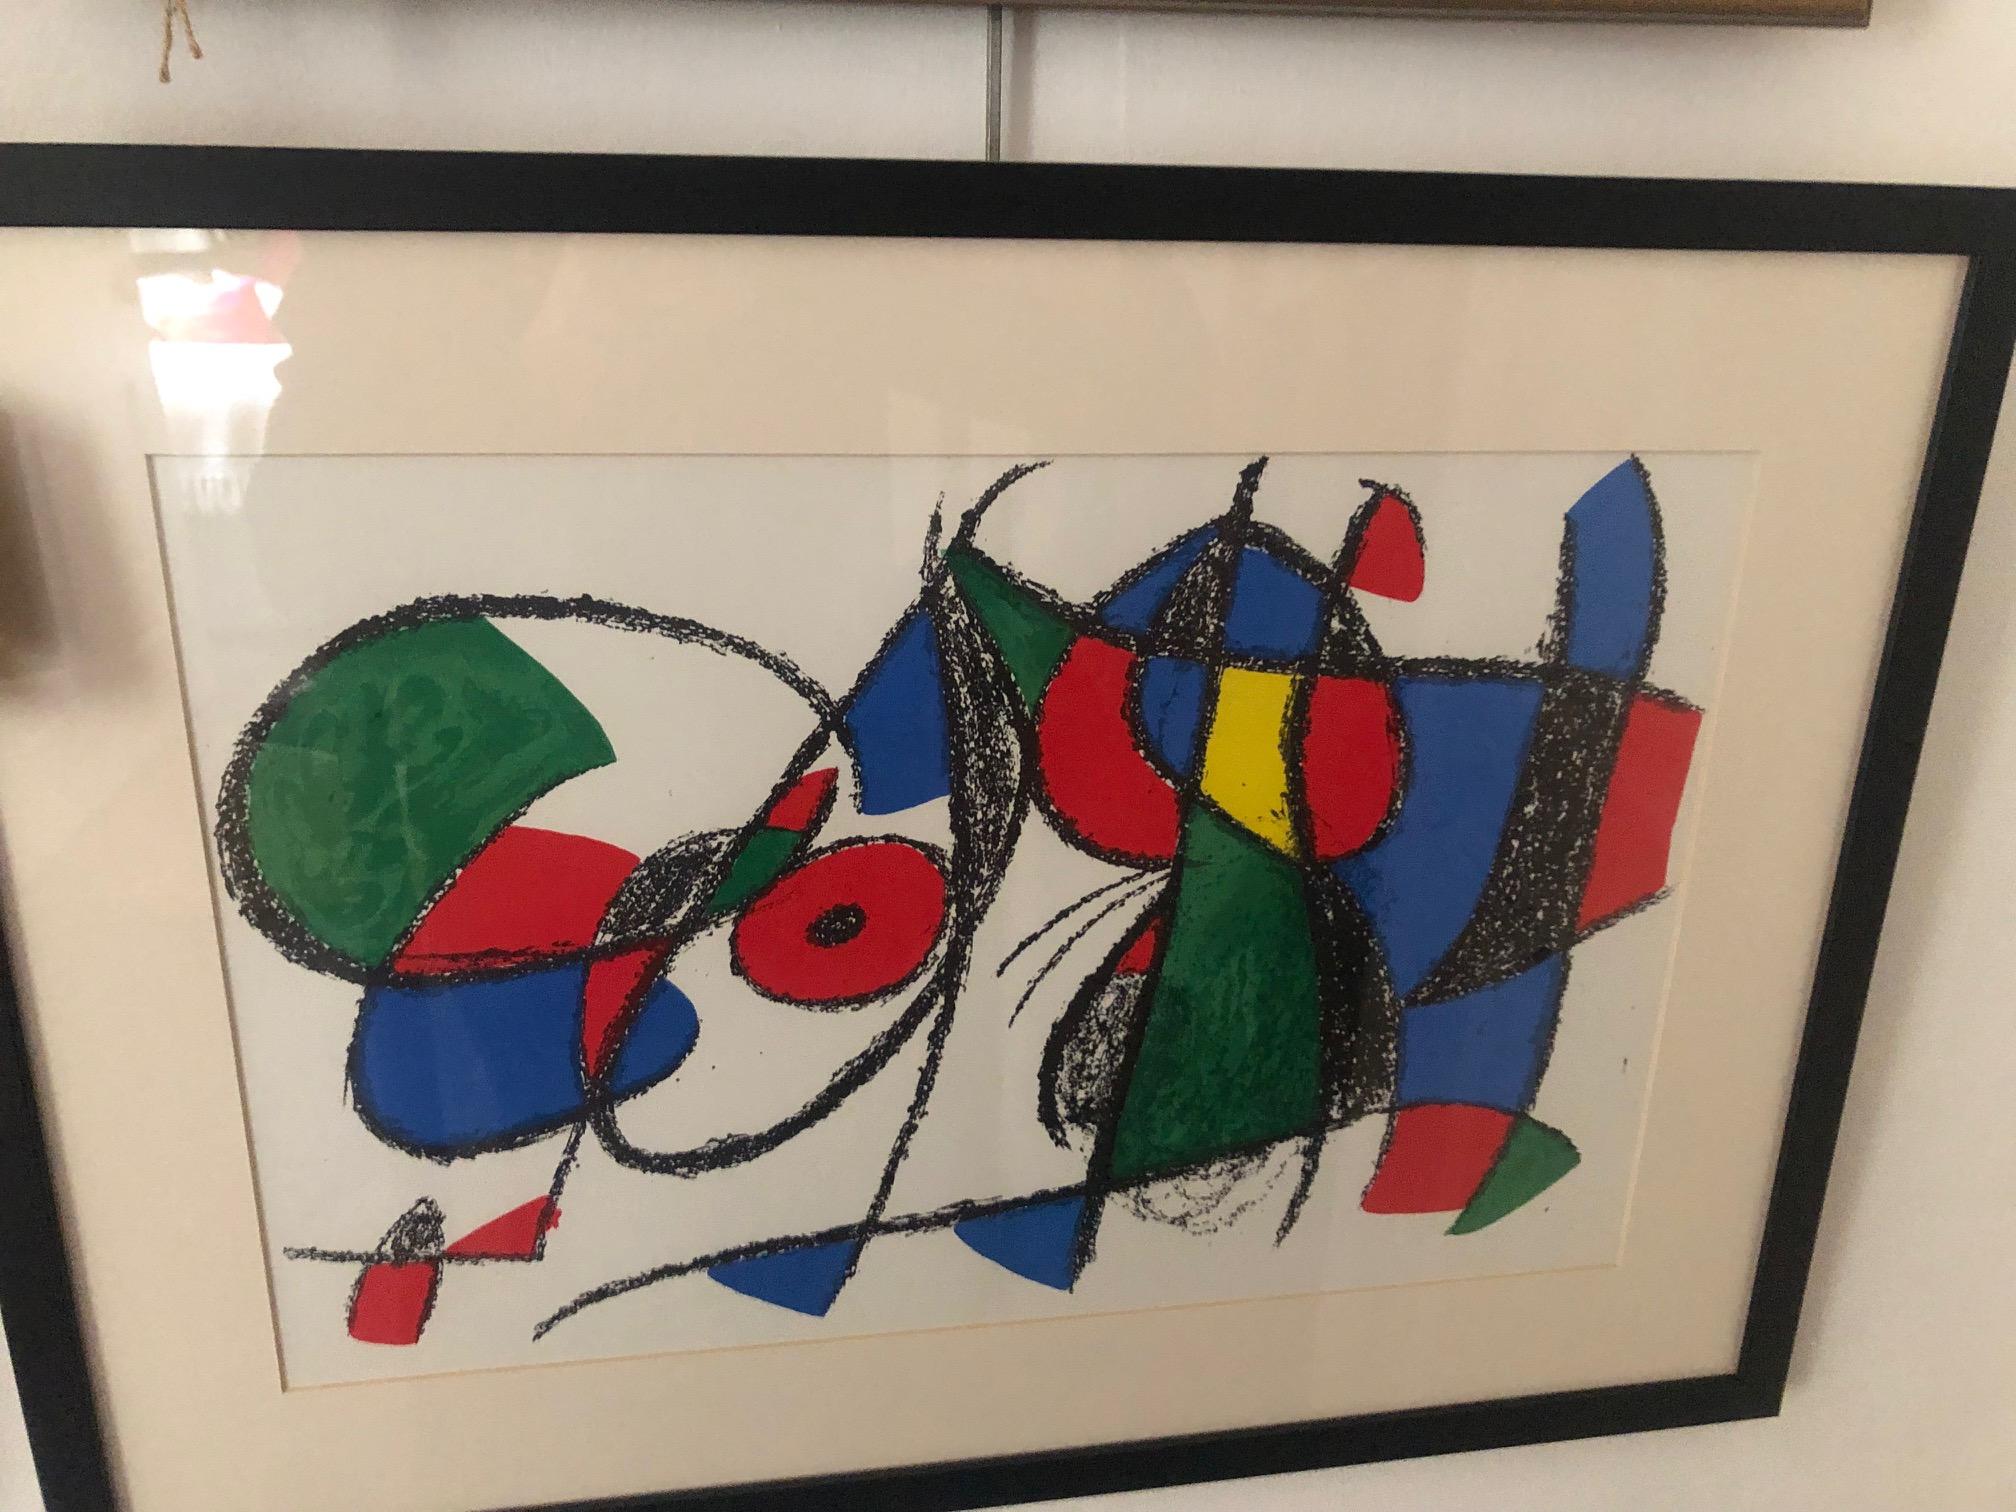 Untitled Limited Edition Lithograph Colourful, Abstract image - Framed - Art by Joan Miró